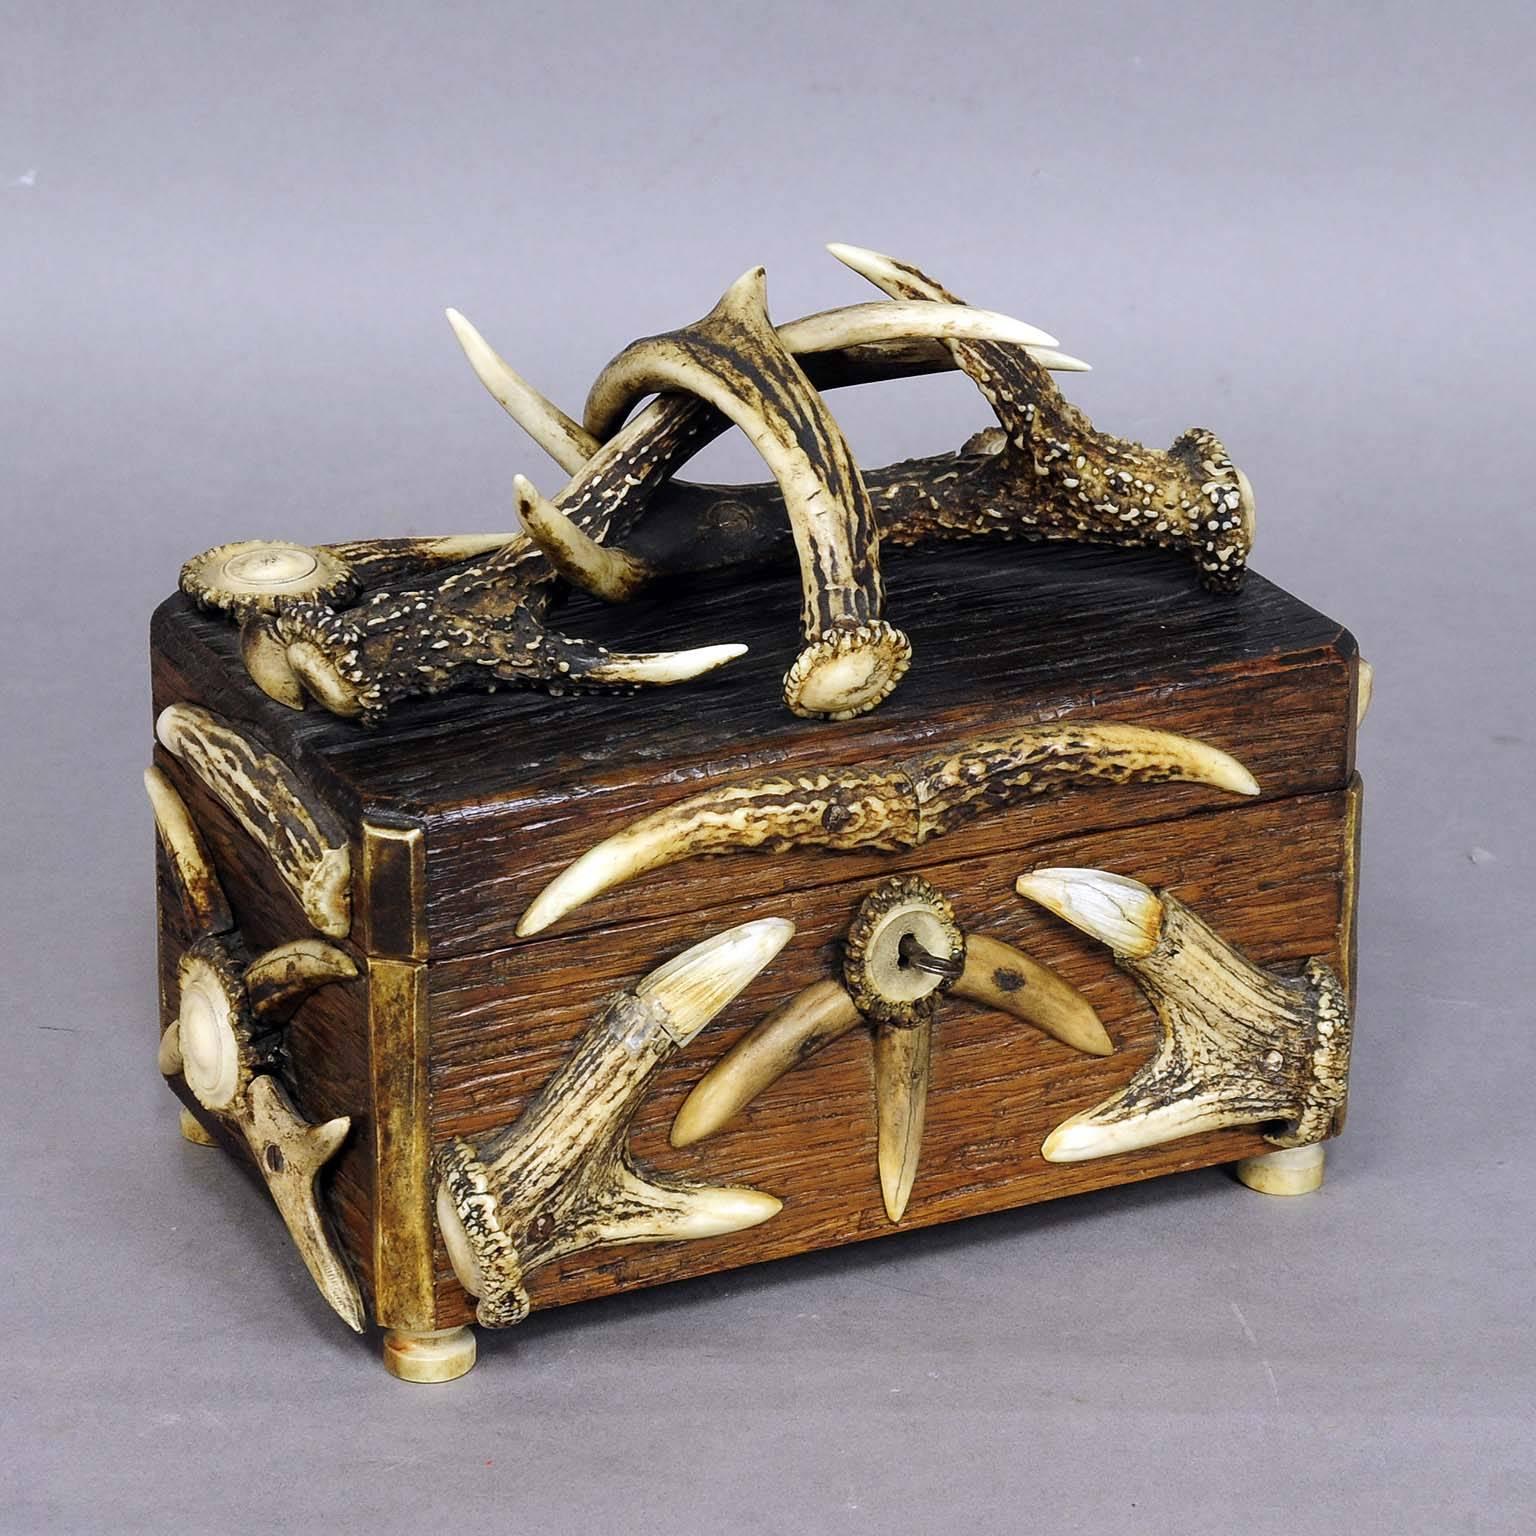 A wooden carved casket decorated with various antler pieces and carved horn roses. Feet made of Horn. Comes along with its original key, circa 1900.